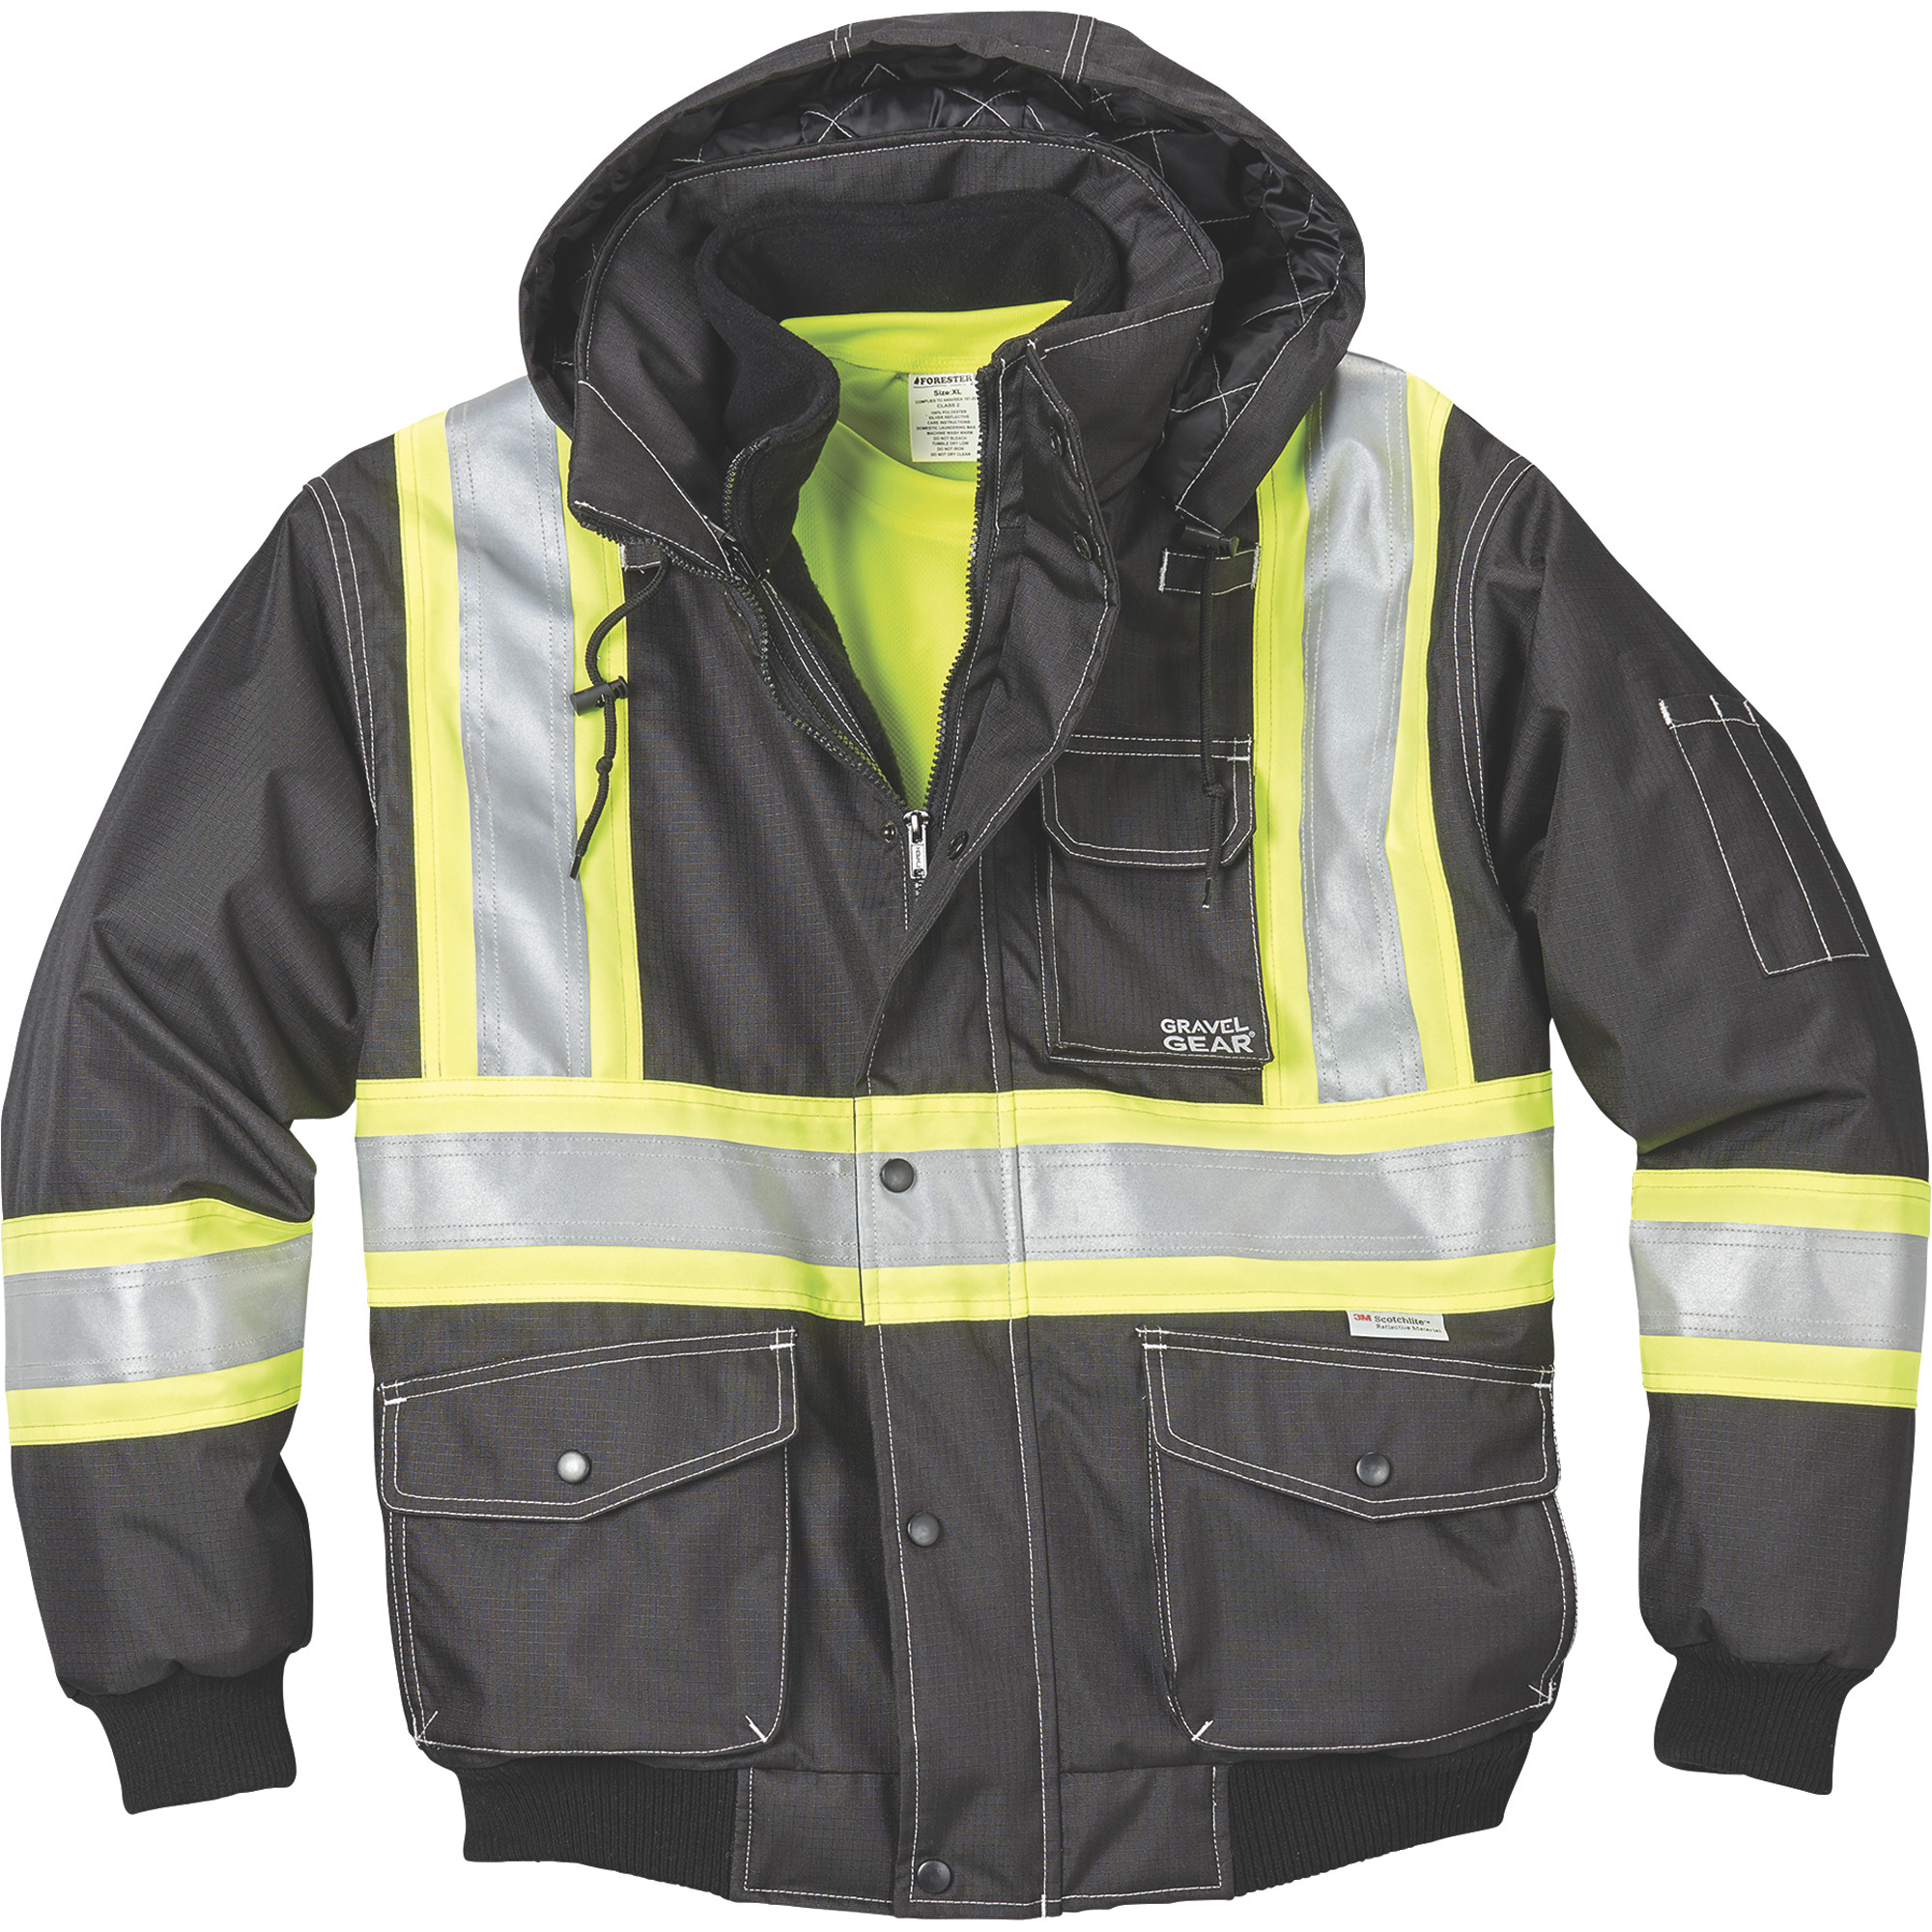 Gravel Gear Men's Class 1 High Visibility 3-in-1 Bomber Jacket â Lime, XL